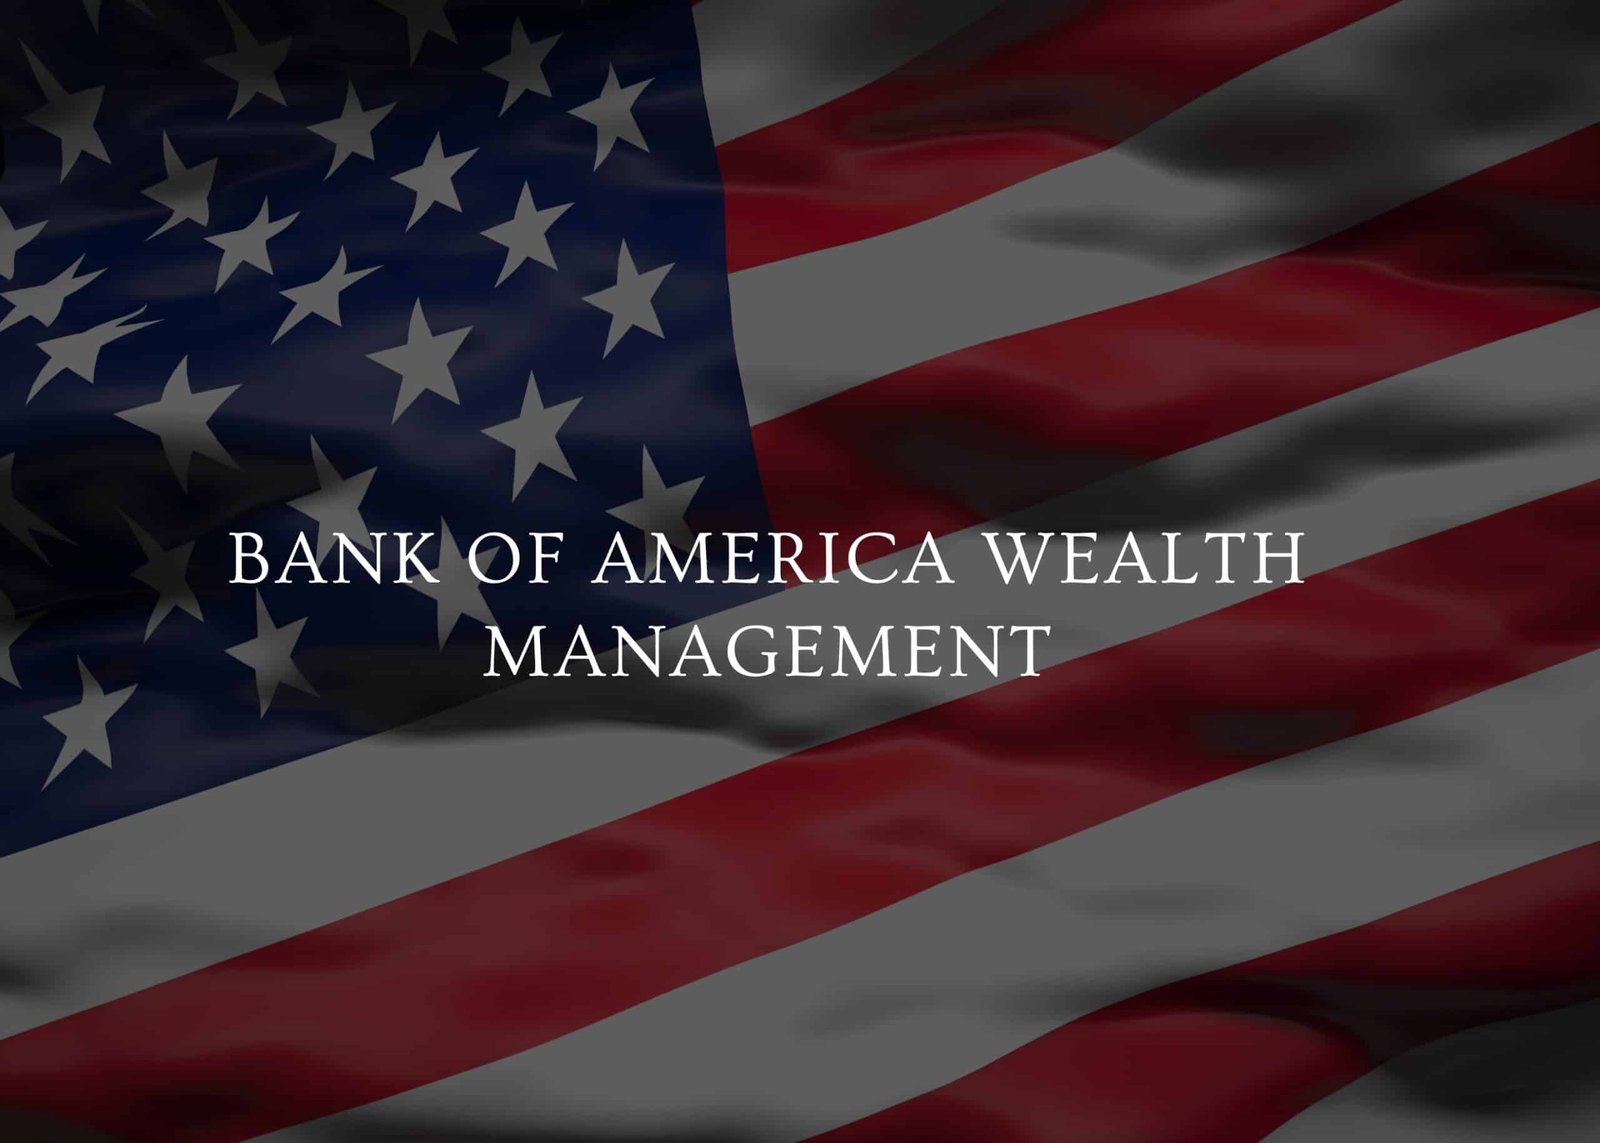 Bank of America Wealth Management